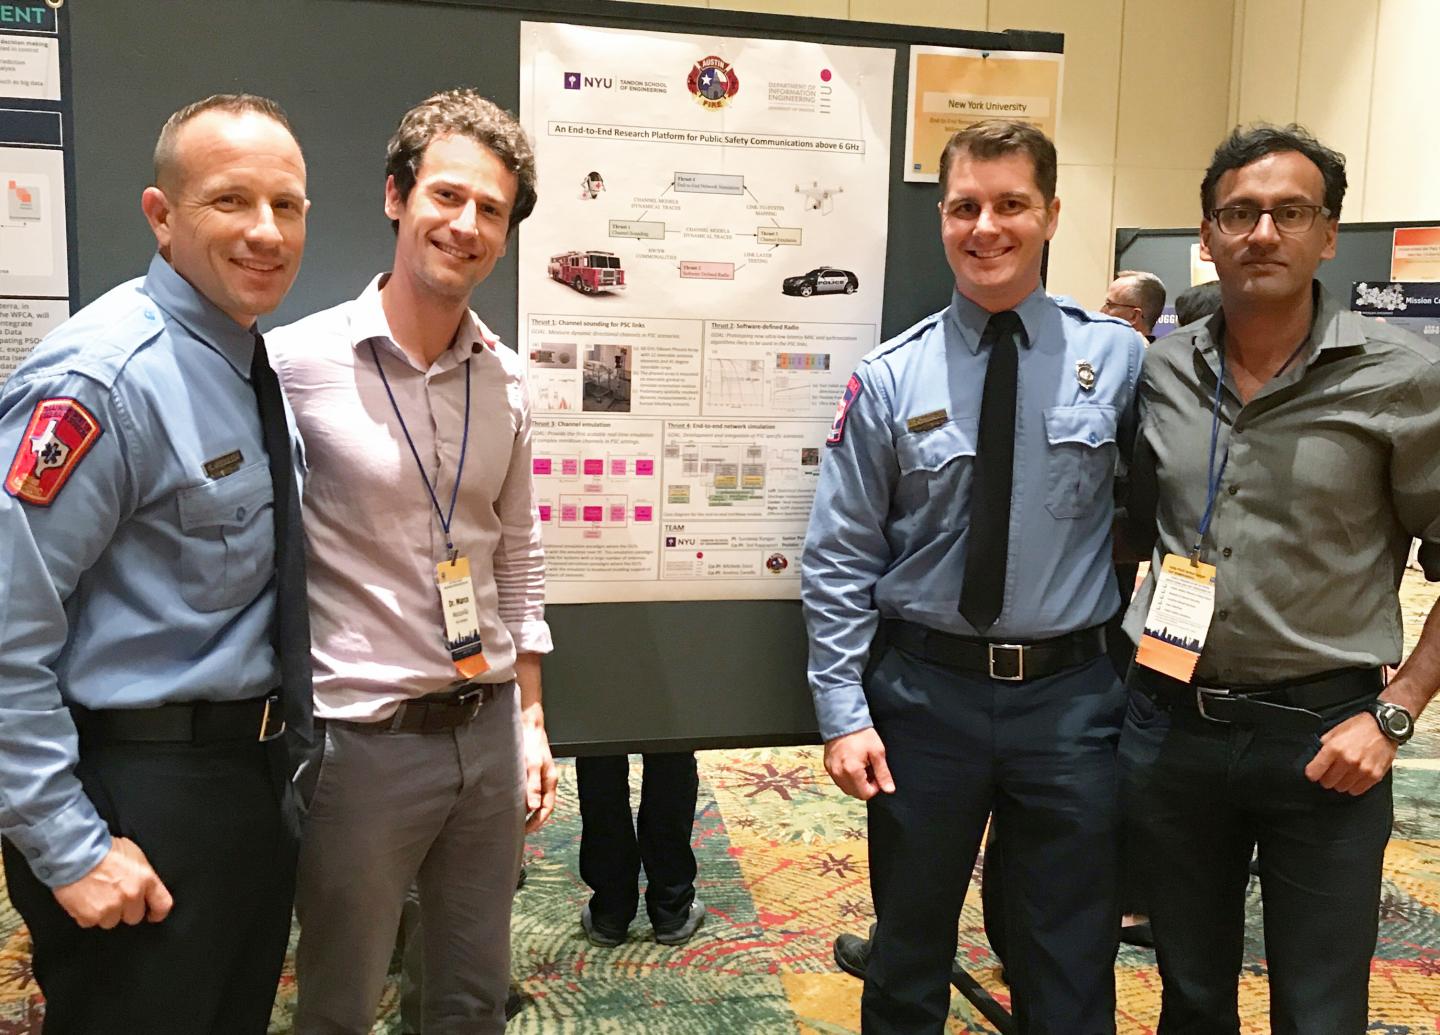 Researching the Next Generation of Public Safety